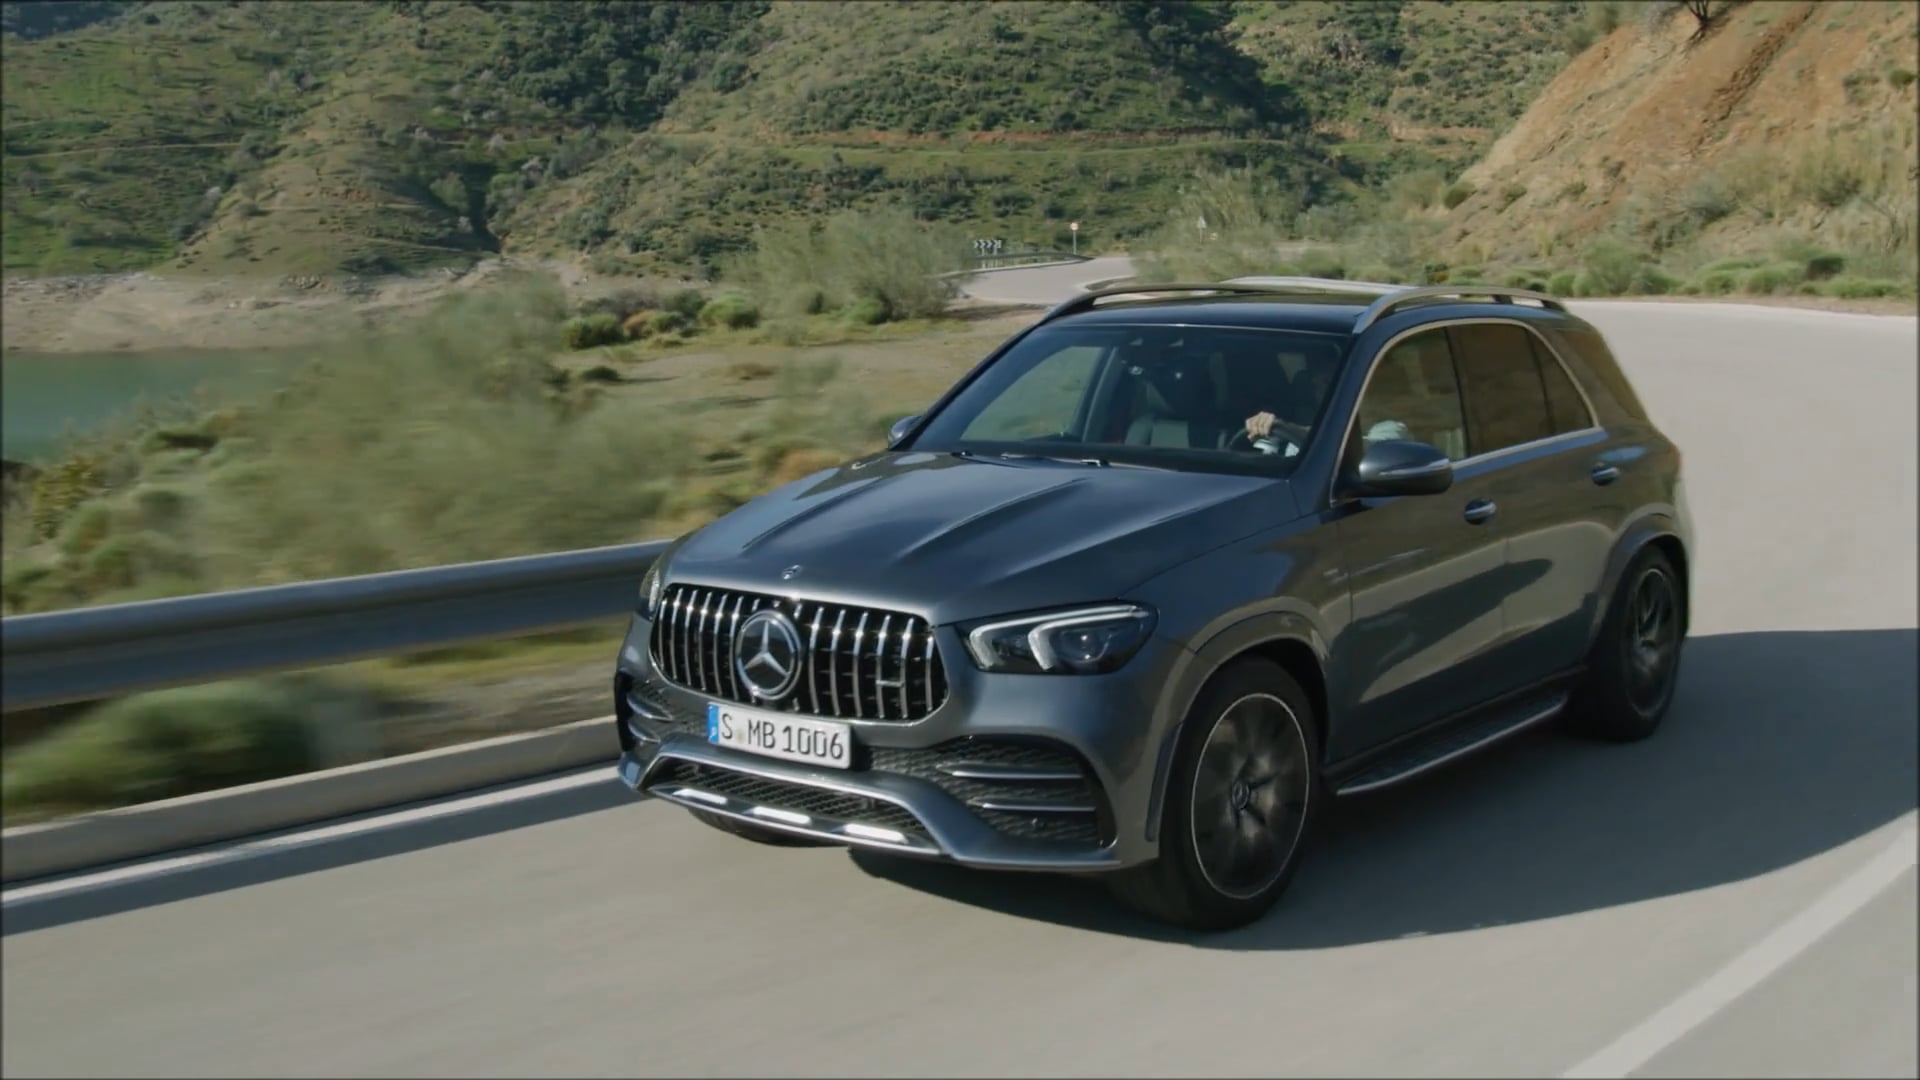 Overview: 2020 Mercedes-AMG GLE 53 4MATIC+